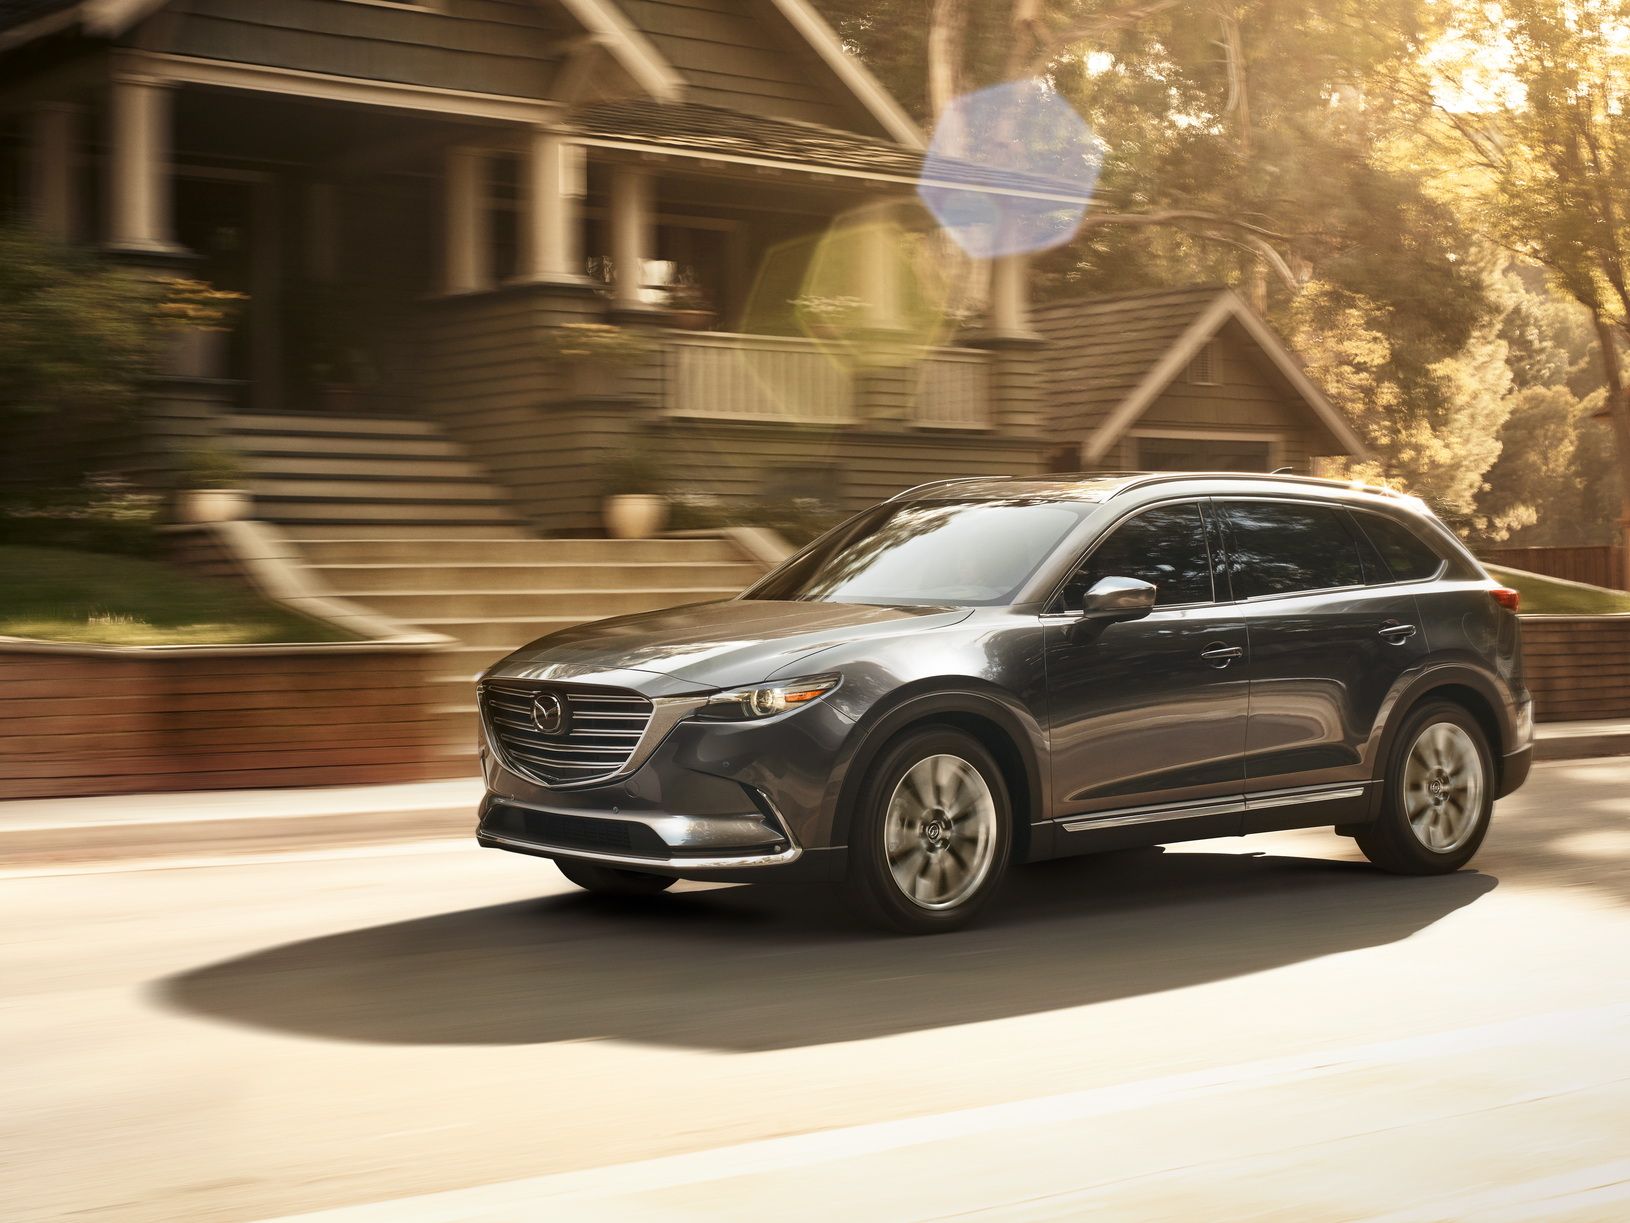 2019 2019 Mazda CX-9 With Much More Gear For A Bit More Money